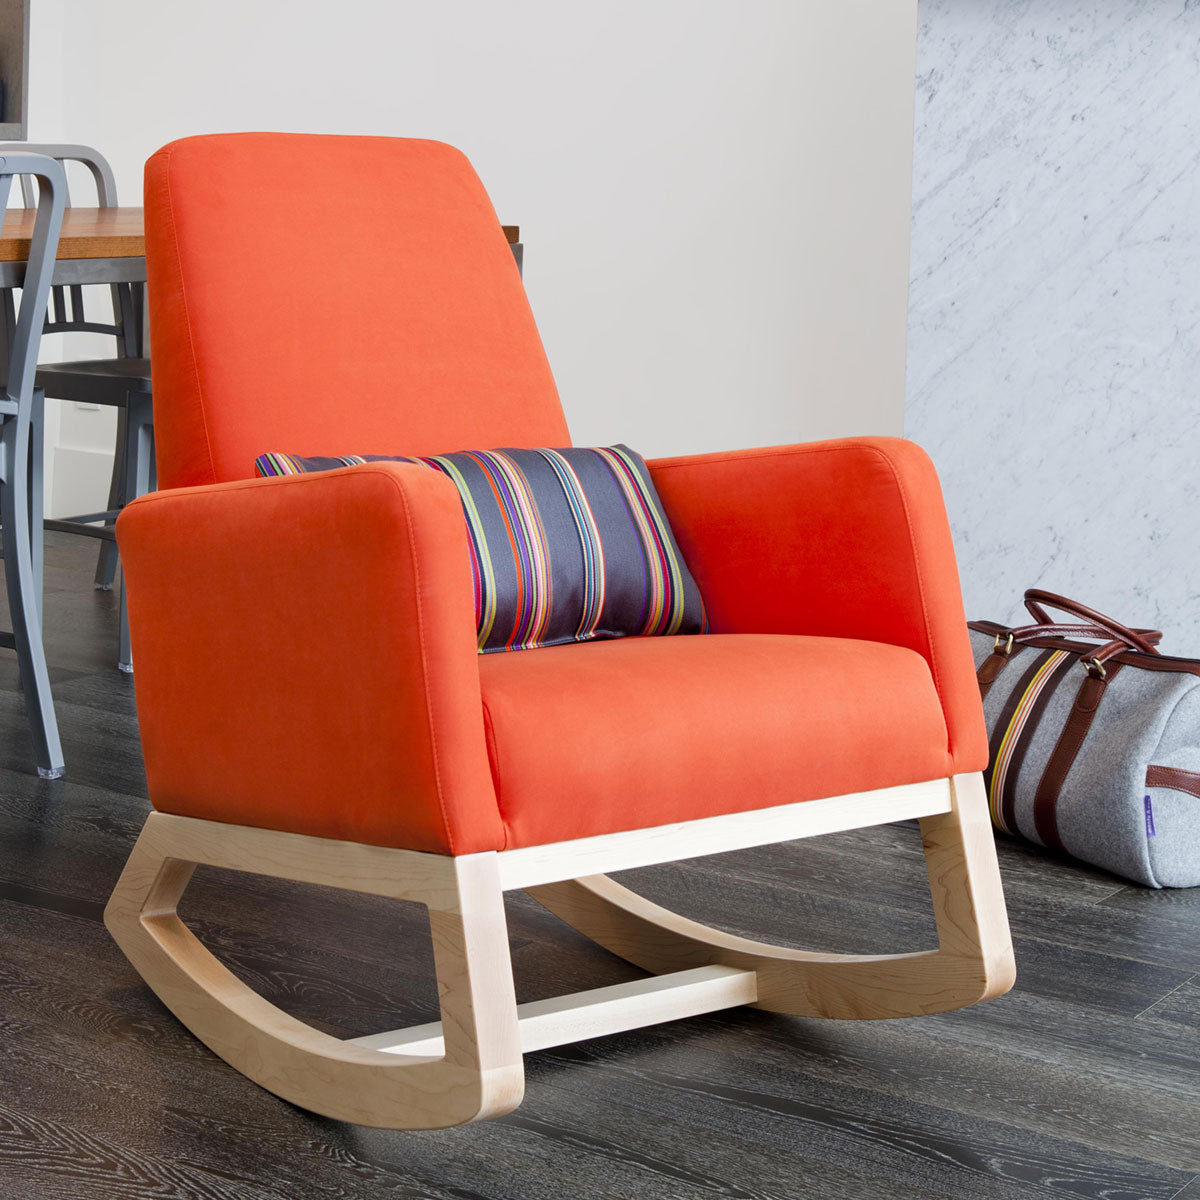 Furniture Ideas - 14 Awesome Modern Rocking Chair Designs For Your Home